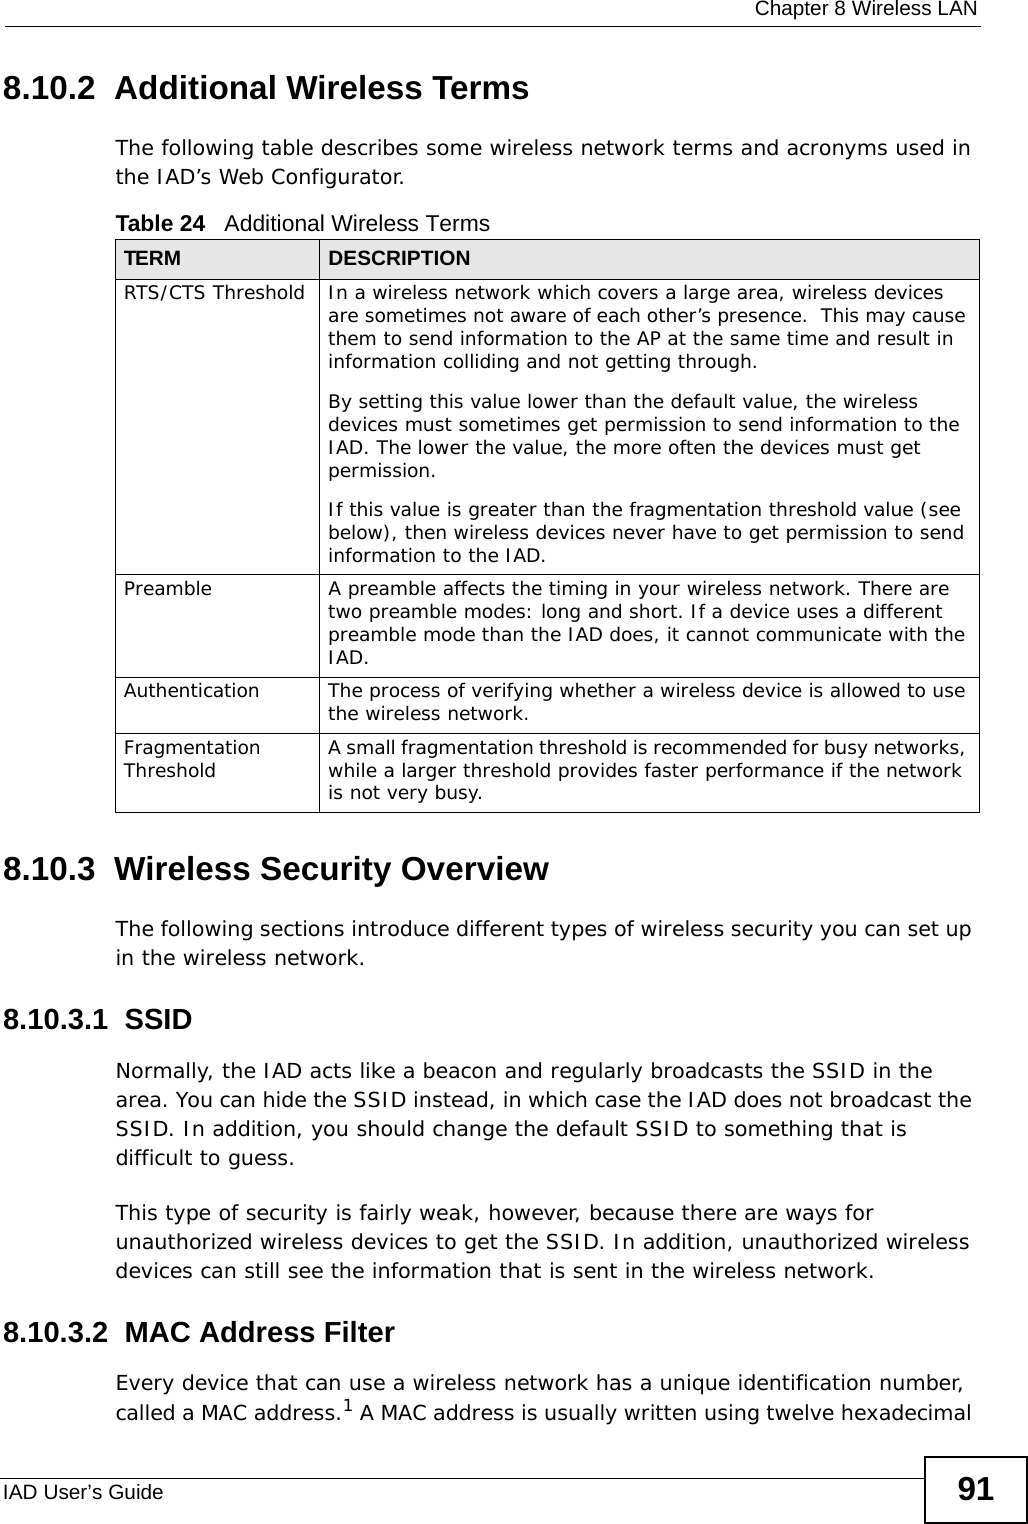  Chapter 8 Wireless LANIAD User’s Guide 918.10.2  Additional Wireless TermsThe following table describes some wireless network terms and acronyms used in the IAD’s Web Configurator.8.10.3  Wireless Security OverviewThe following sections introduce different types of wireless security you can set up in the wireless network.8.10.3.1  SSIDNormally, the IAD acts like a beacon and regularly broadcasts the SSID in the area. You can hide the SSID instead, in which case the IAD does not broadcast the SSID. In addition, you should change the default SSID to something that is difficult to guess.This type of security is fairly weak, however, because there are ways for unauthorized wireless devices to get the SSID. In addition, unauthorized wireless devices can still see the information that is sent in the wireless network.8.10.3.2  MAC Address FilterEvery device that can use a wireless network has a unique identification number, called a MAC address.1 A MAC address is usually written using twelve hexadecimal Table 24   Additional Wireless TermsTERM DESCRIPTIONRTS/CTS Threshold In a wireless network which covers a large area, wireless devices are sometimes not aware of each other’s presence.  This may cause them to send information to the AP at the same time and result in information colliding and not getting through.By setting this value lower than the default value, the wireless devices must sometimes get permission to send information to the IAD. The lower the value, the more often the devices must get permission.If this value is greater than the fragmentation threshold value (see below), then wireless devices never have to get permission to send information to the IAD.Preamble A preamble affects the timing in your wireless network. There are two preamble modes: long and short. If a device uses a different preamble mode than the IAD does, it cannot communicate with the IAD.Authentication The process of verifying whether a wireless device is allowed to use the wireless network.Fragmentation Threshold A small fragmentation threshold is recommended for busy networks, while a larger threshold provides faster performance if the network is not very busy.